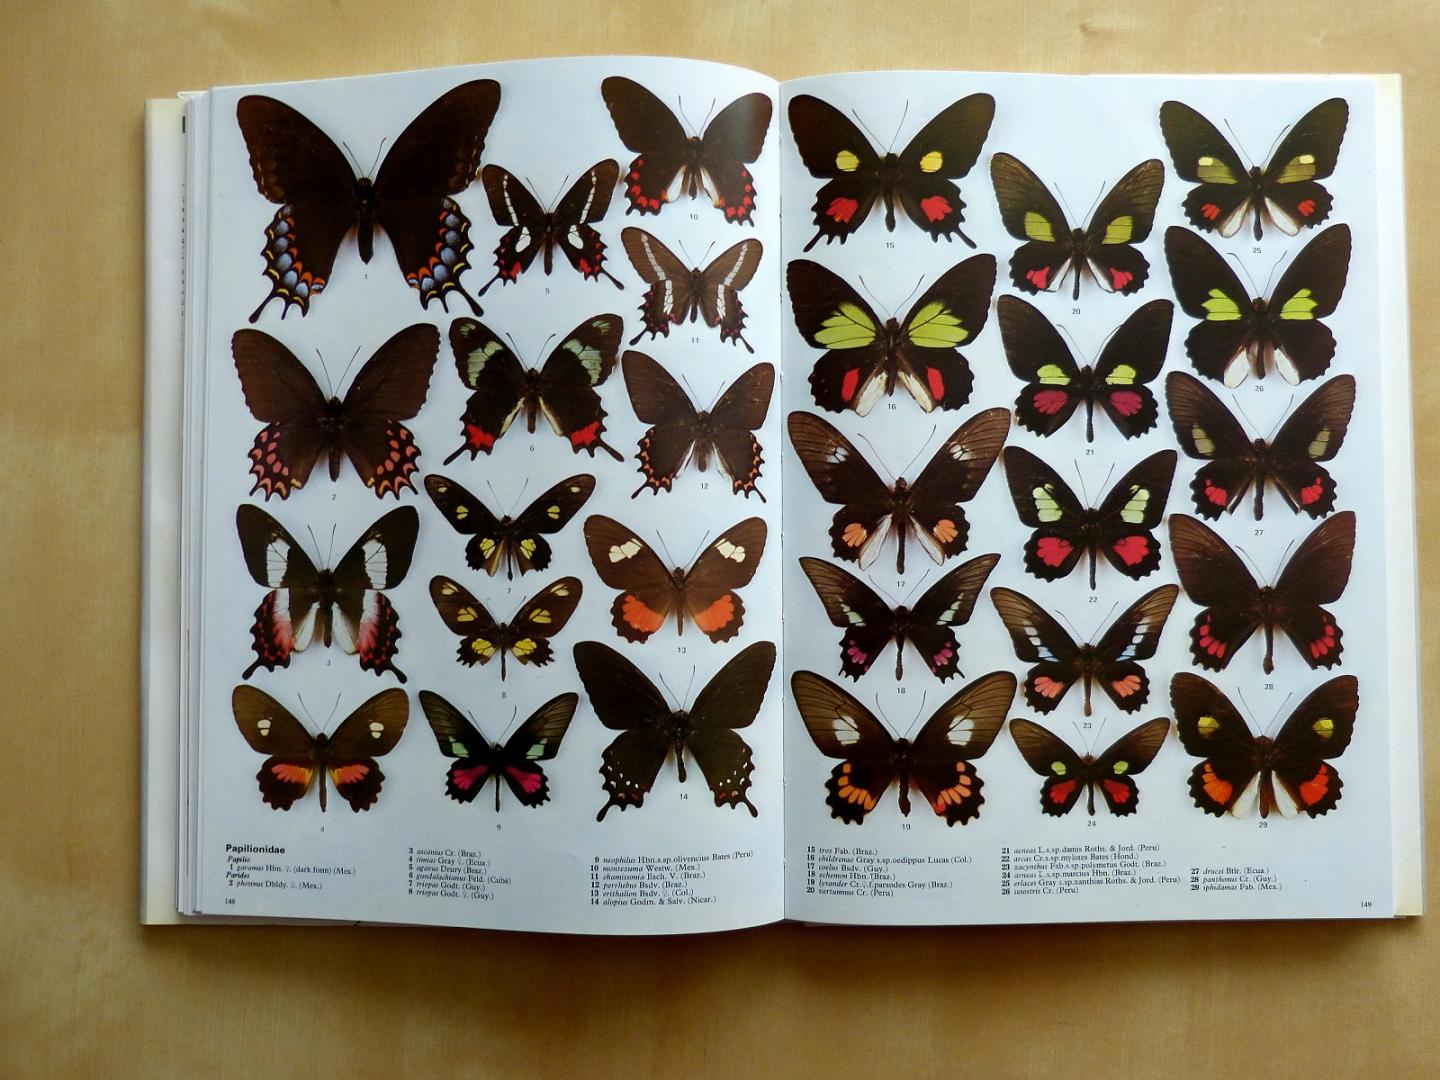 Smart, Paul - The illustrated Encyclopedia of the Buitterfly World